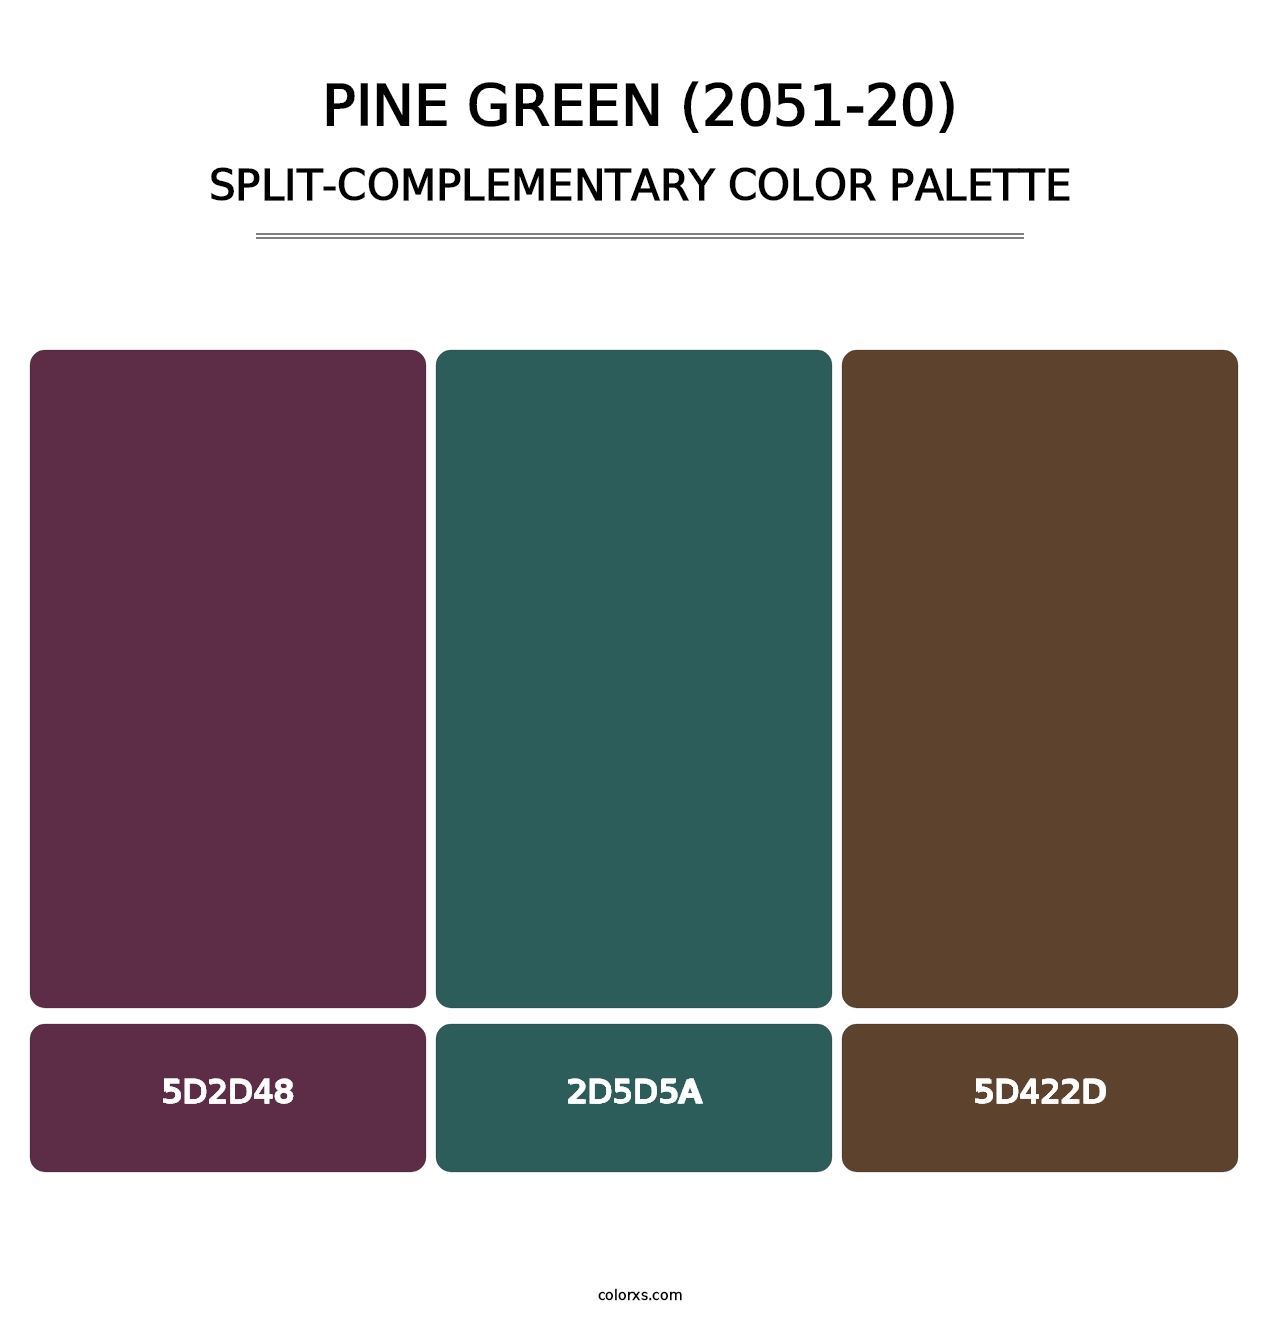 Pine Green (2051-20) - Split-Complementary Color Palette